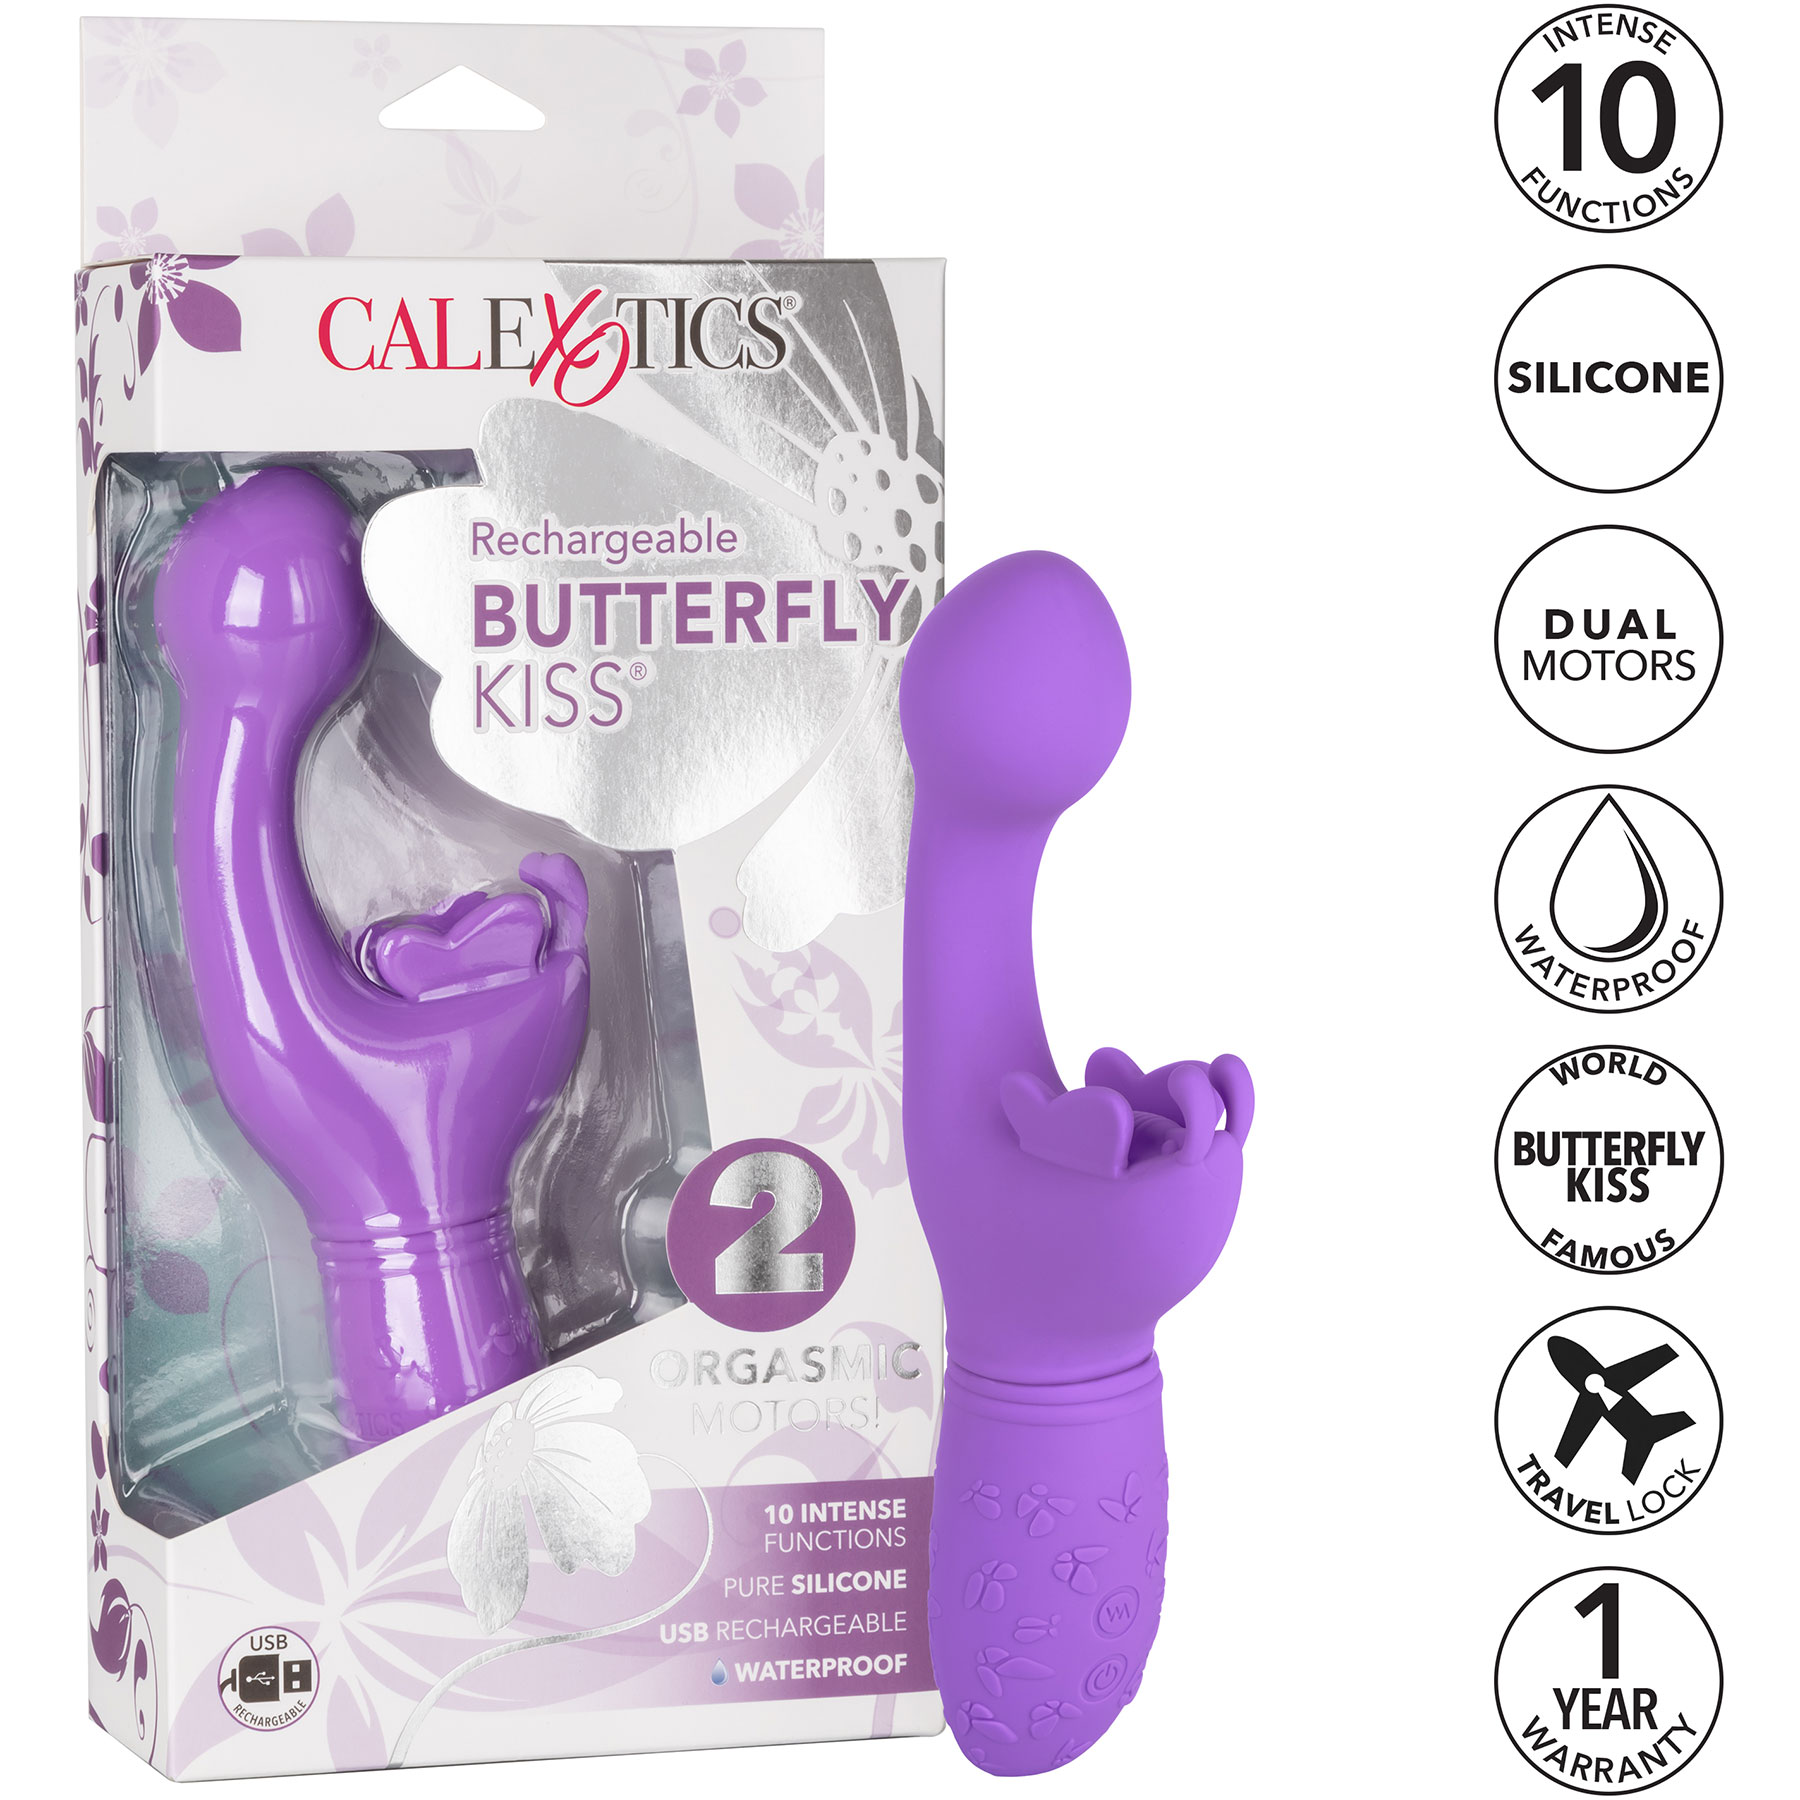 Butterfly Kiss Silicone Rechargeable Waterproof Dual-Stimulation Vibrator - Features